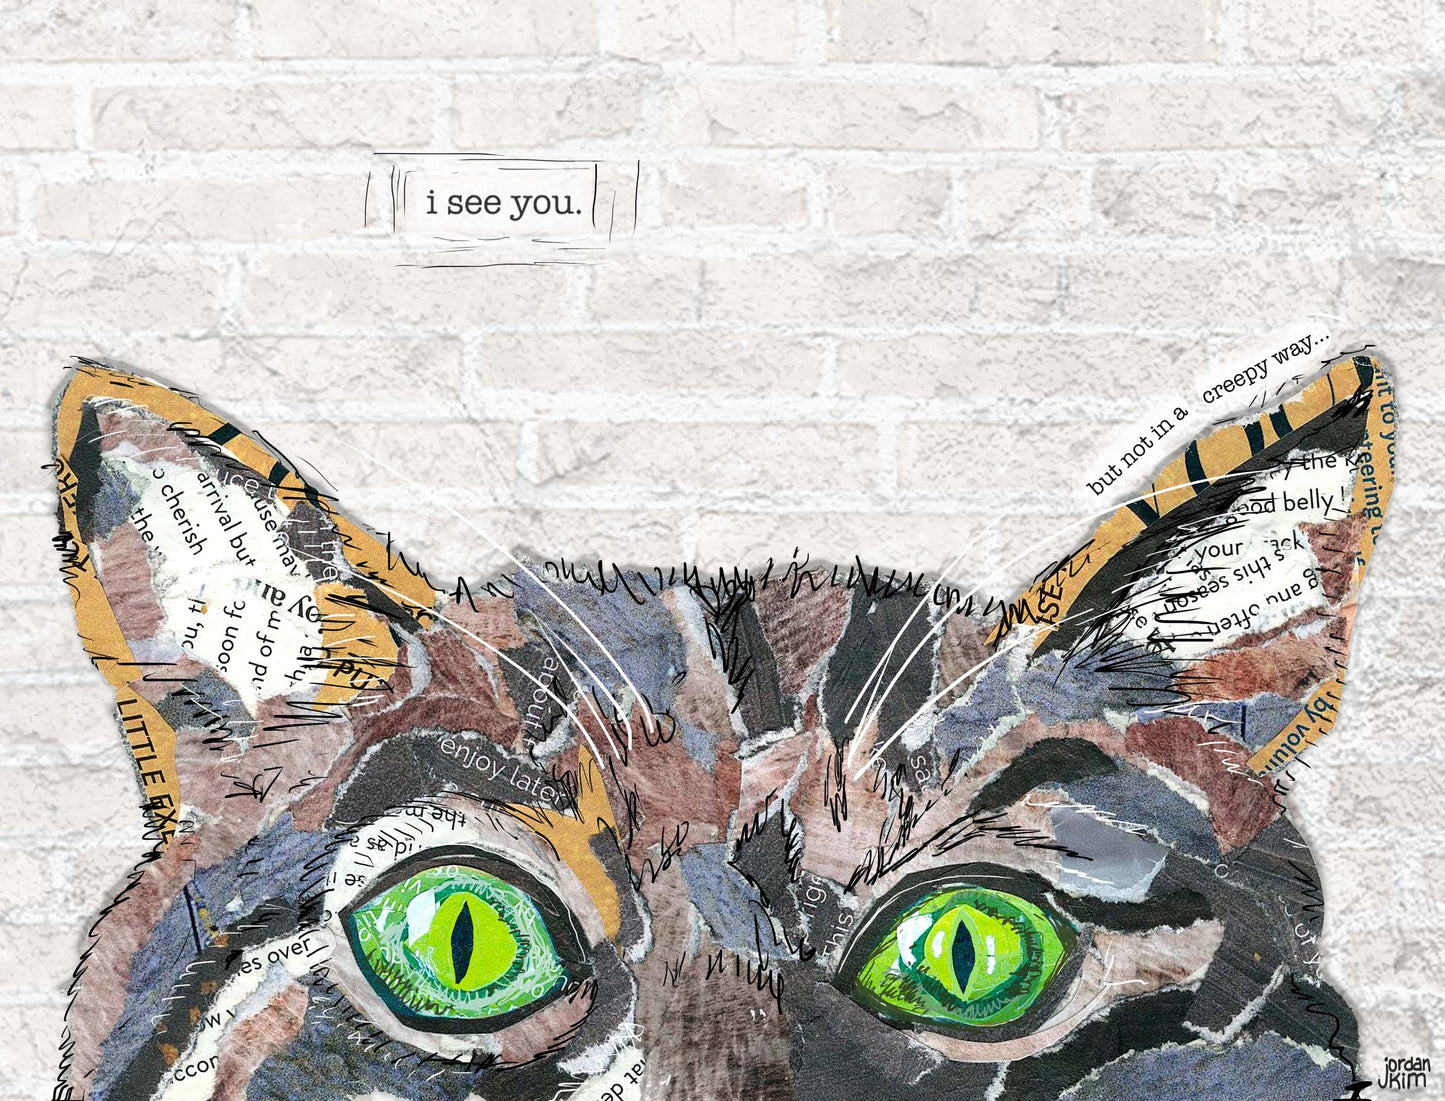 20"x16"x 1.5" of a mixed media collage of a Cat, pets, green eyes - funny text